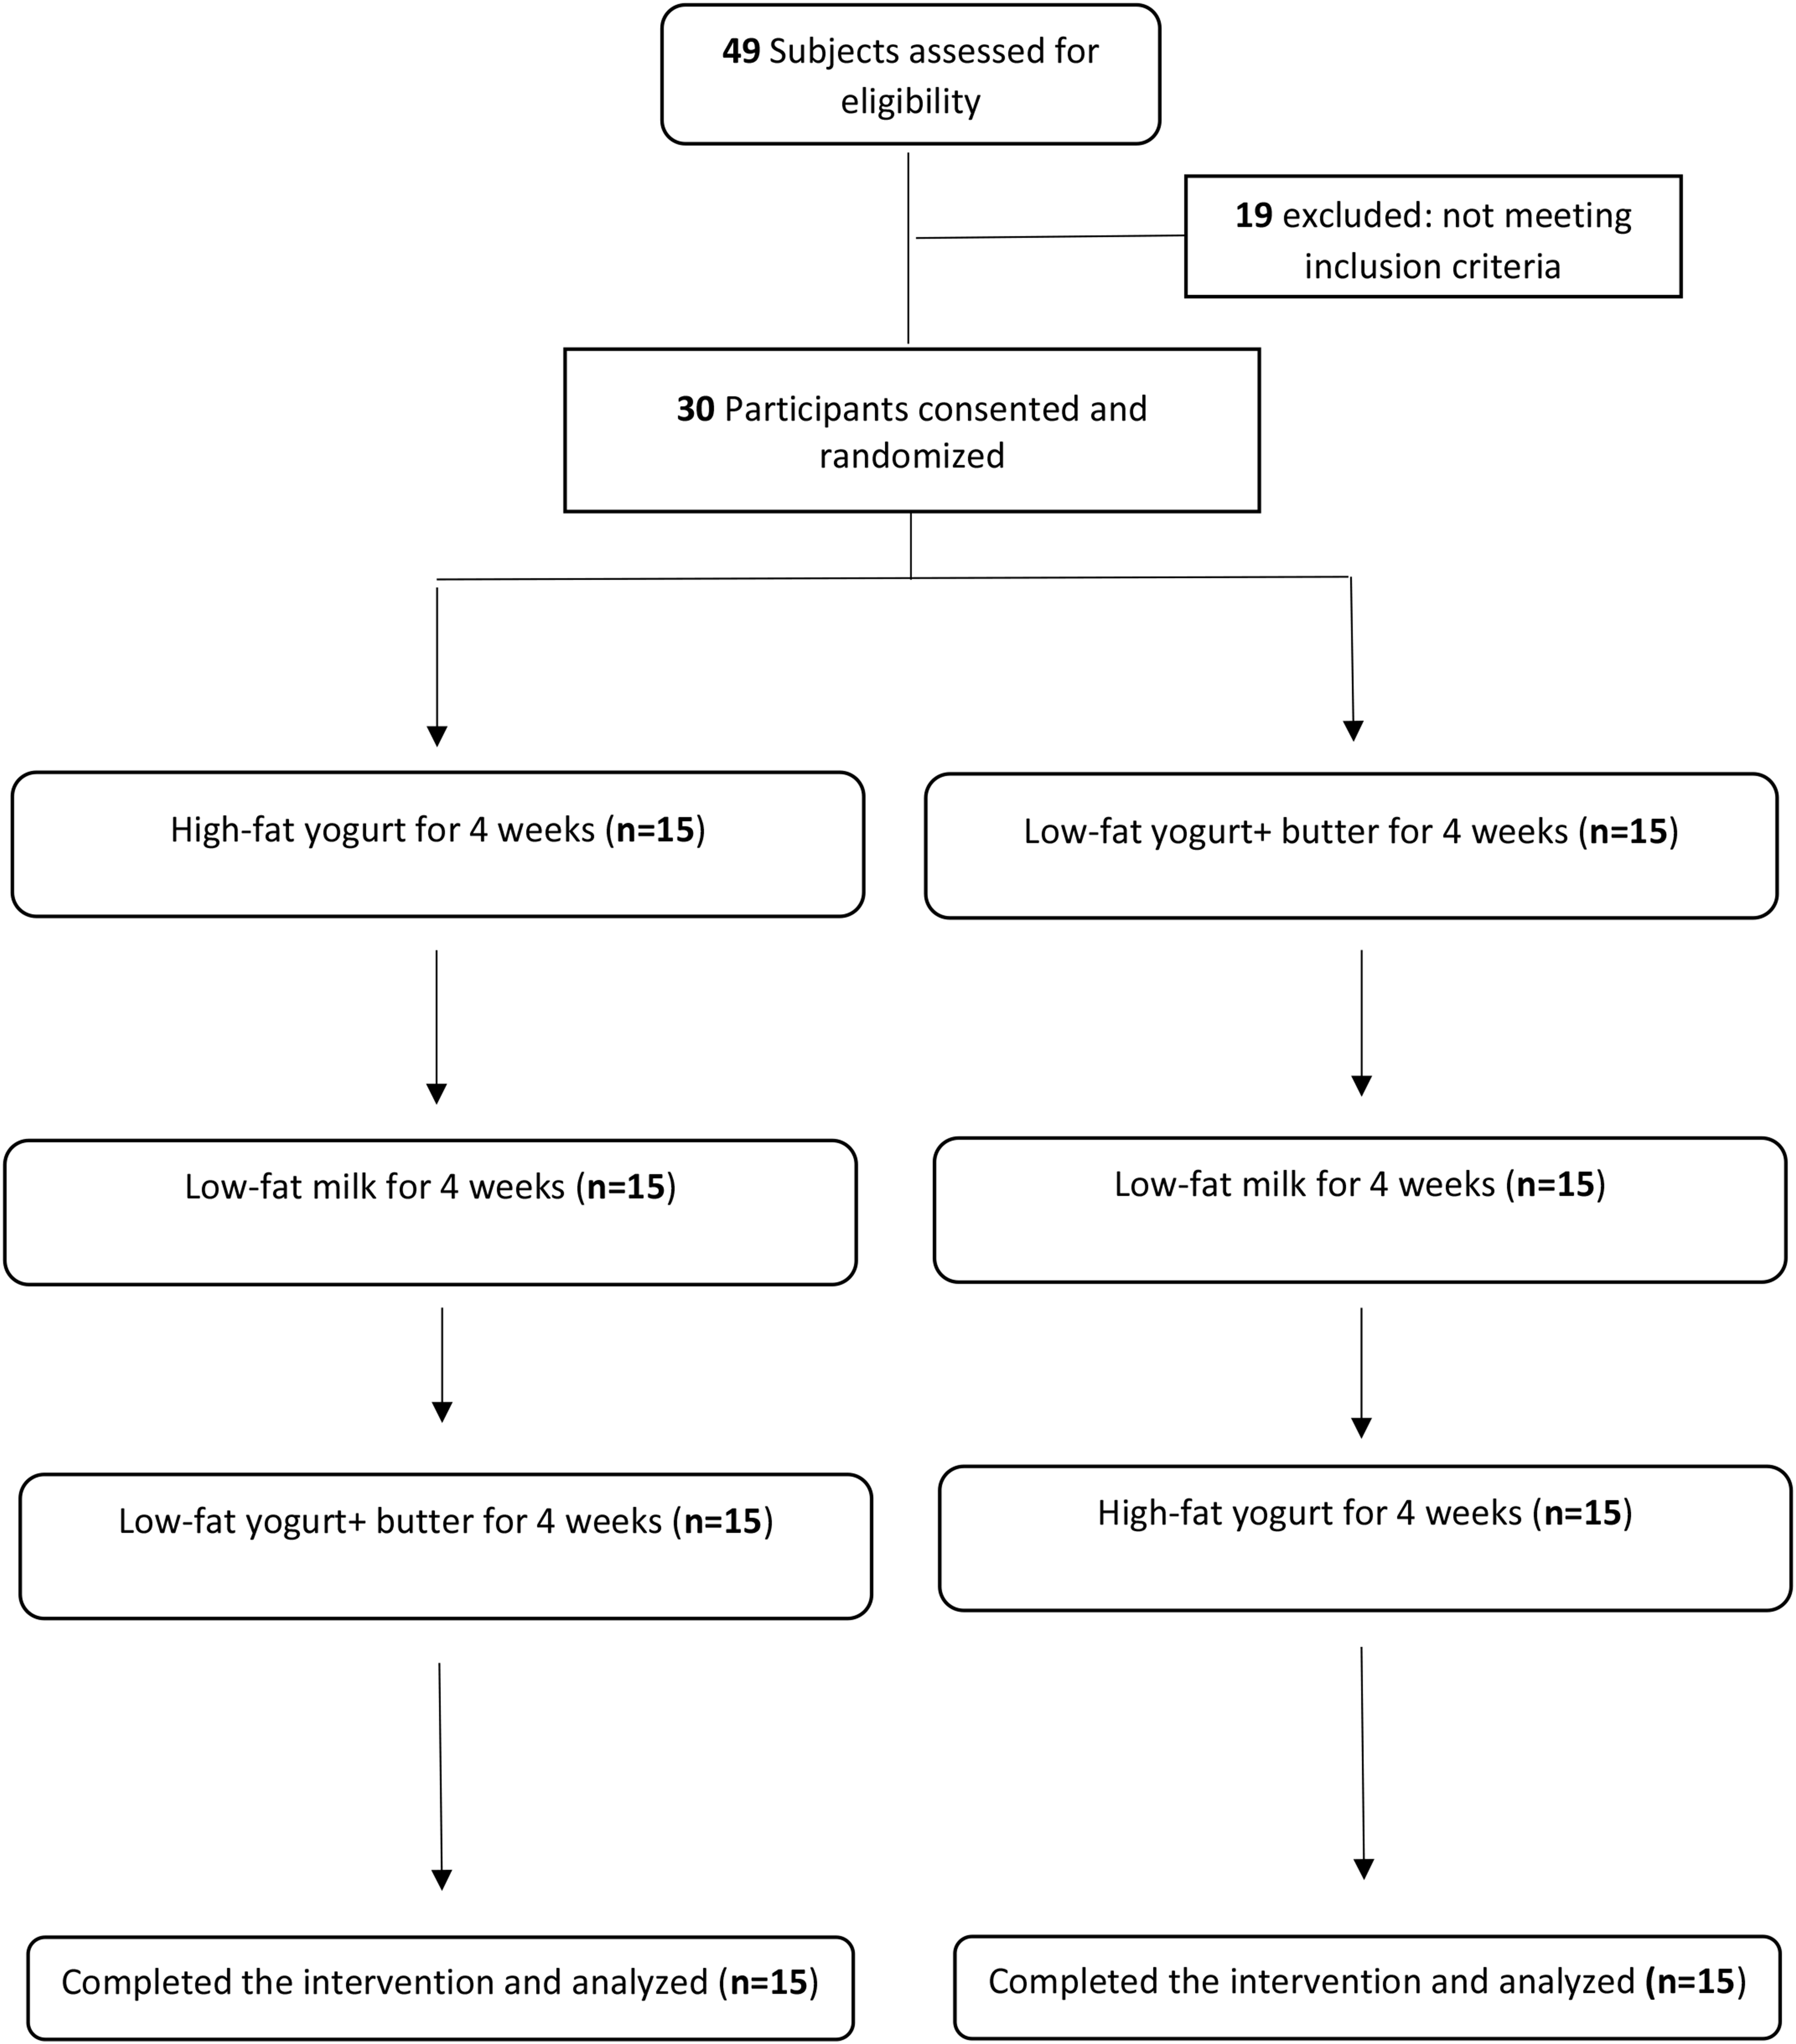 Comparison of the impact of saturated fat from full-fat yogurt or low-fat yogurt and butter on cardiometabolic factors: a randomized cross-over trial